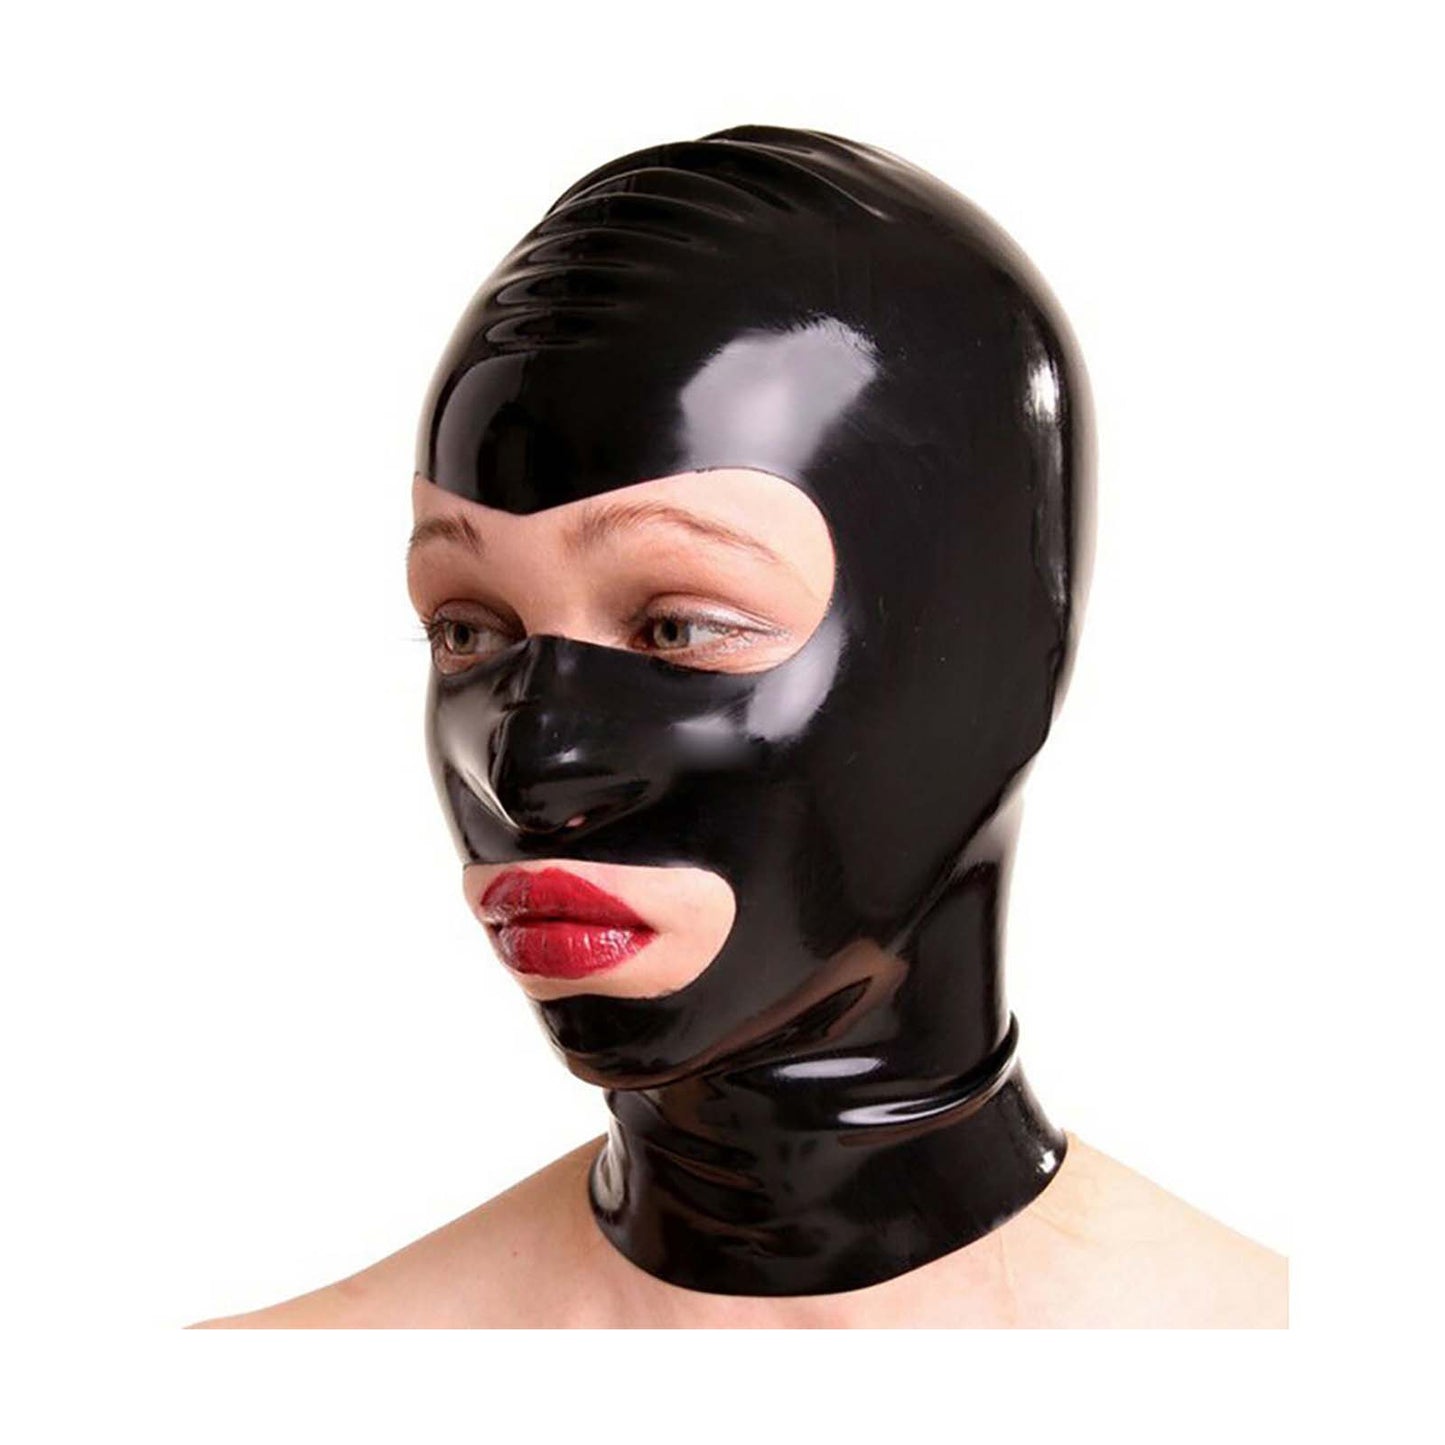 MONNIK Black Latex Hood Rubber Unisex Mask Open Eyes&Mouth for Fetish Catsuit Party Halloween Costume